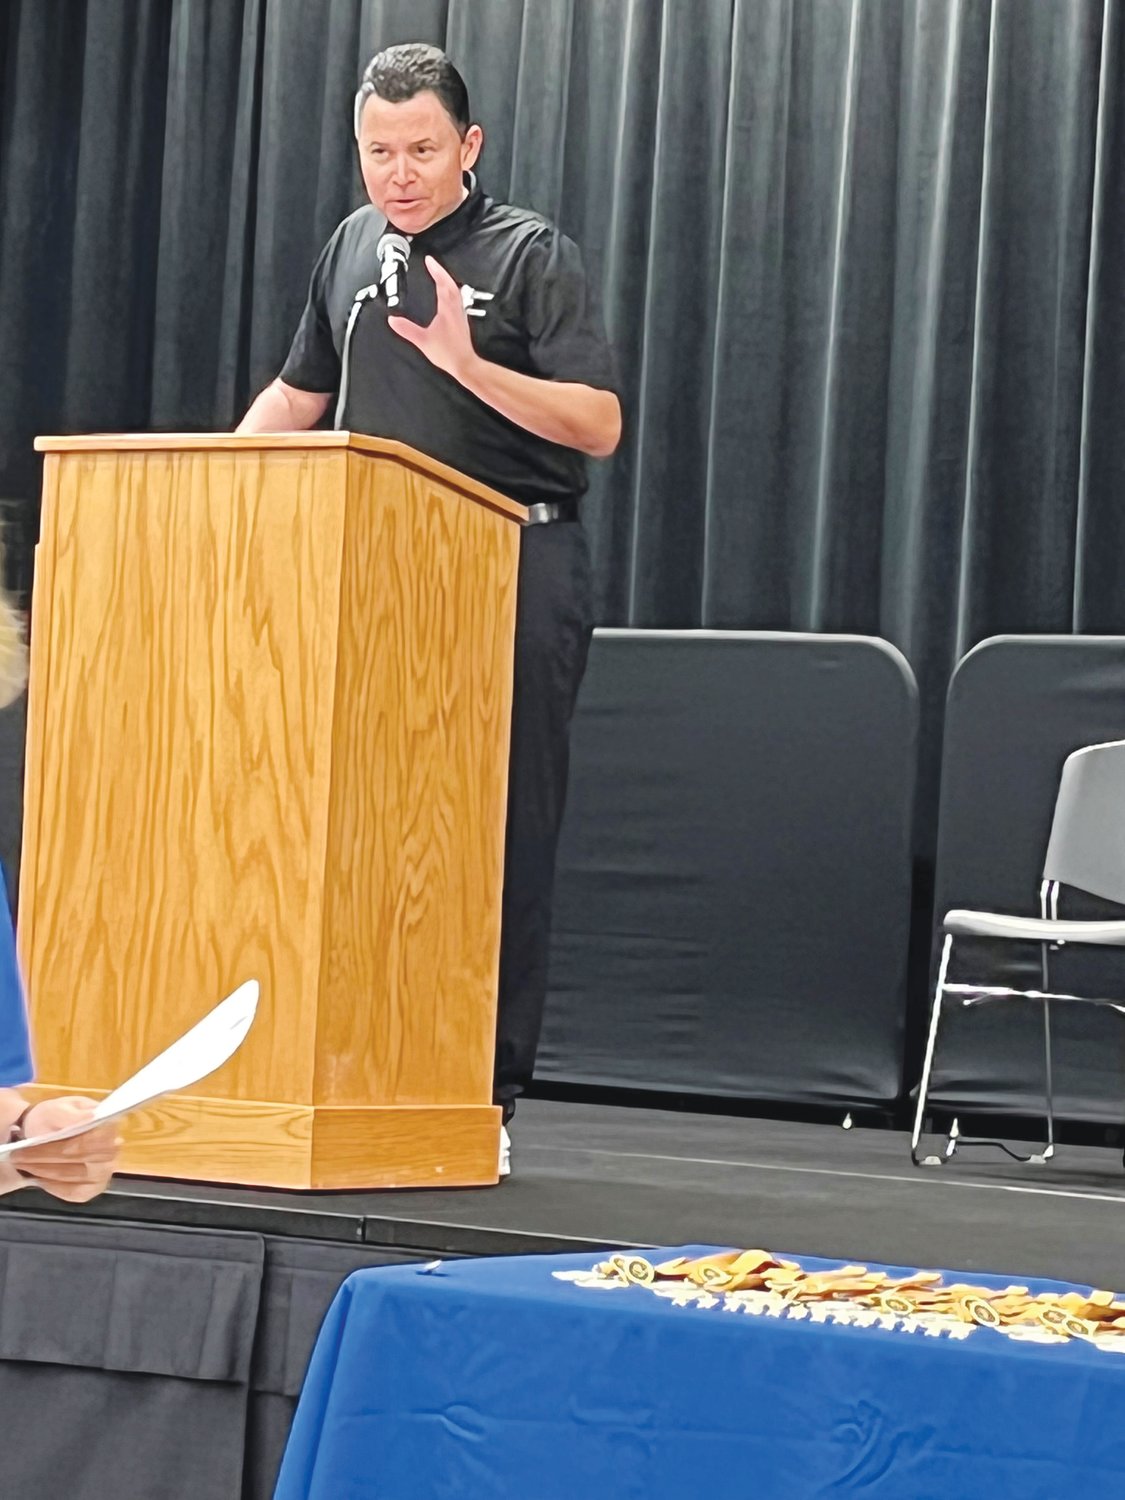 Brad Allen, president and executive director of North Carolina Senior Games, served as emcee of the Chatham County Senior Games & SilverArts 2022 Awards and Recognition Ceremony last Friday at Chatham County Agricultural and Conference Center in Pittsboro.